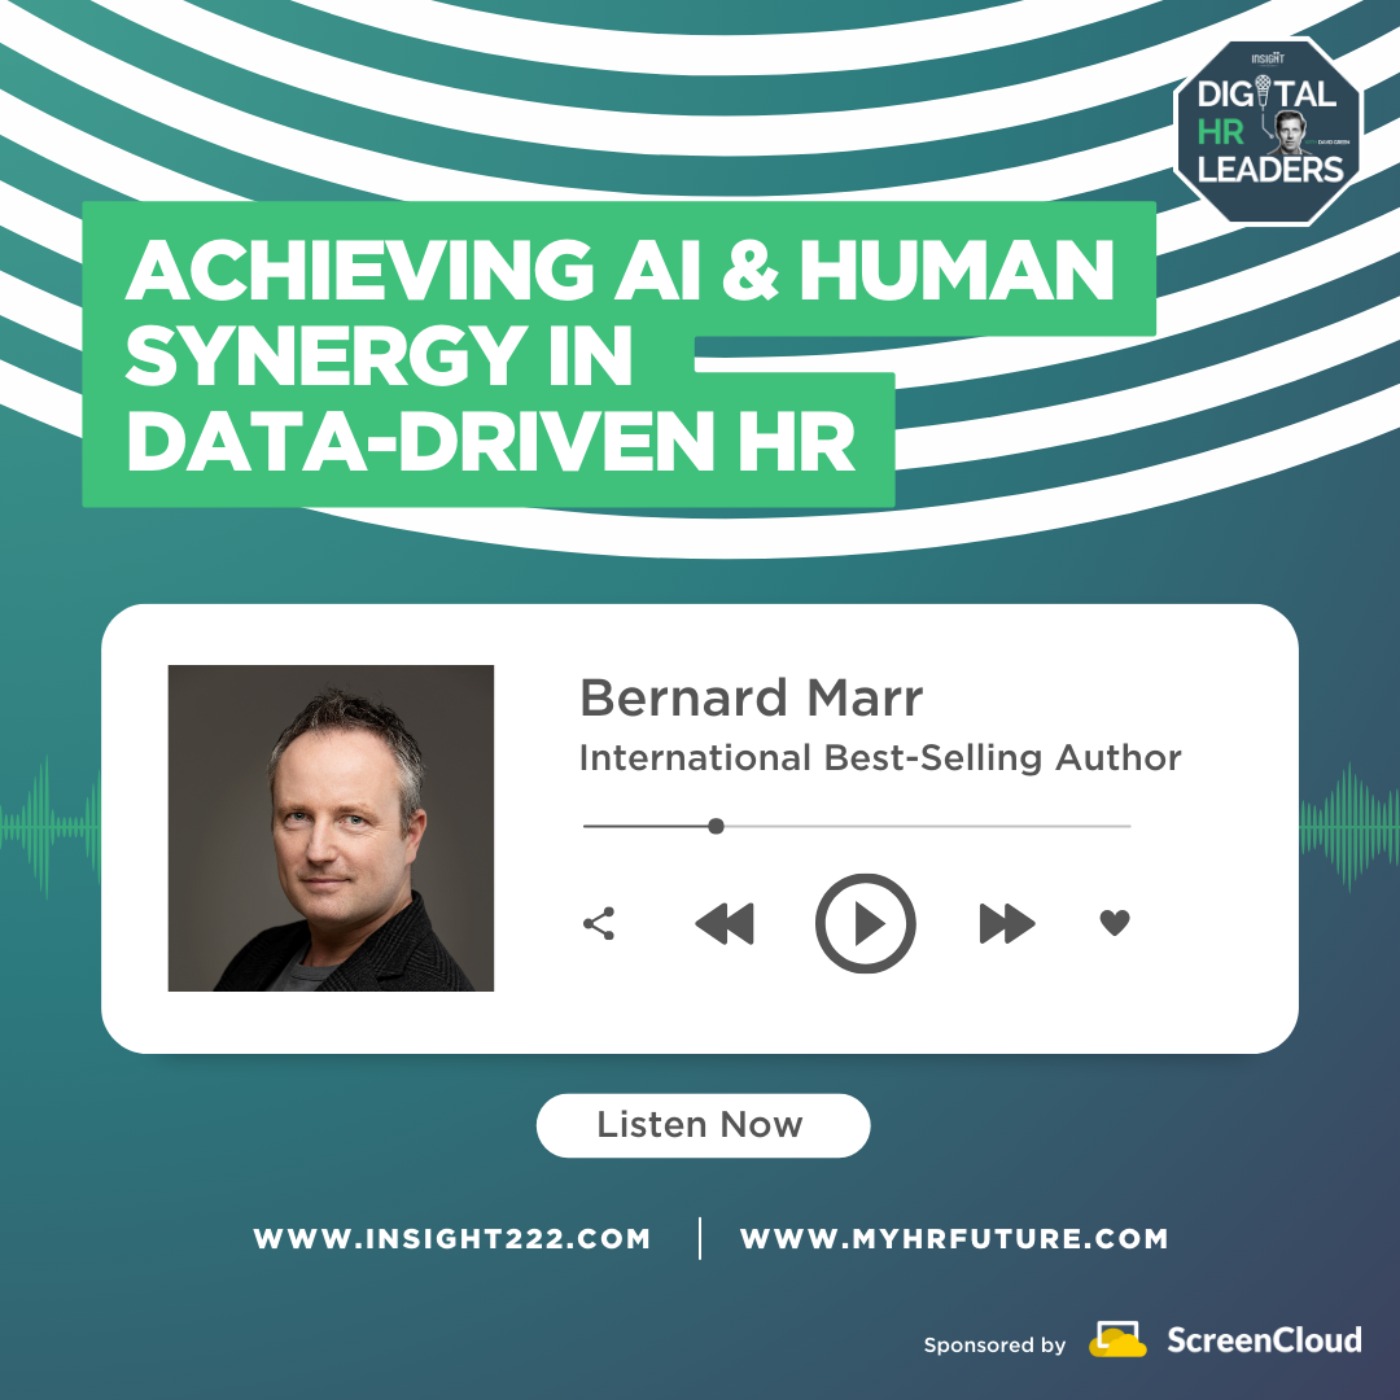 Achieving AI & Human Synergy in Data-Driven HR